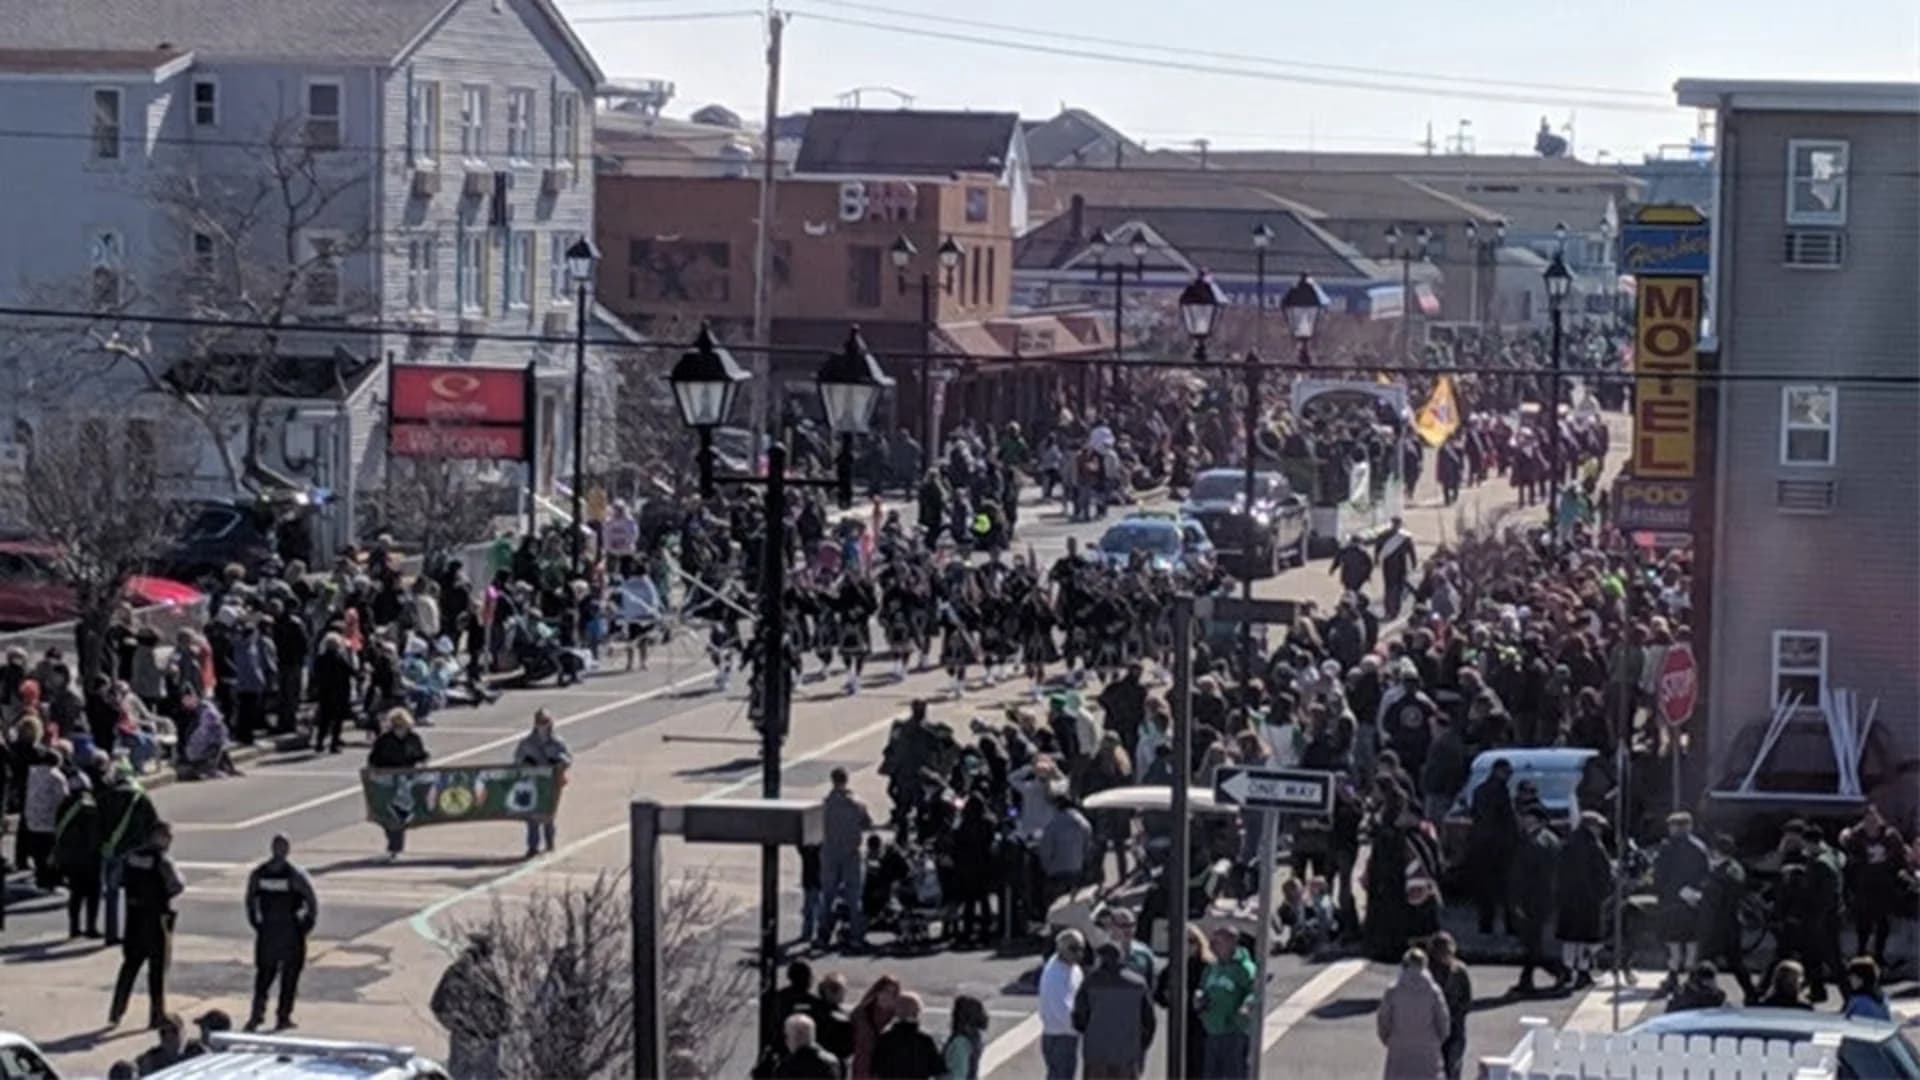 Your 2020 New Jersey St. Patrick's Day Photos